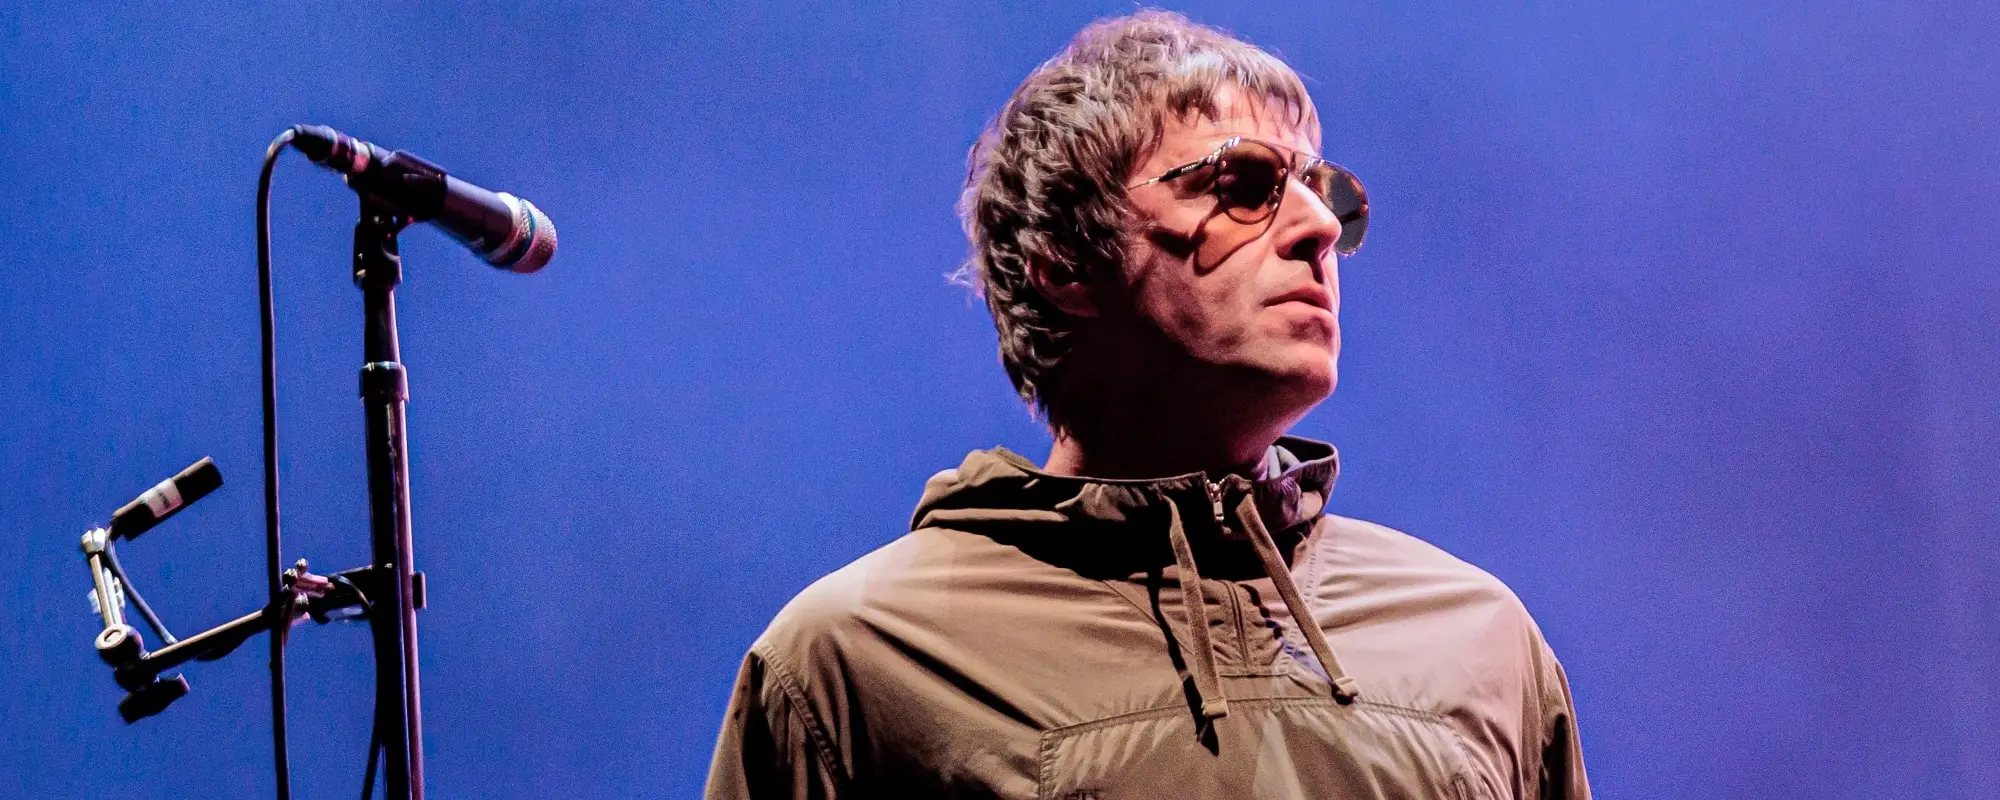 Liam Gallagher Will Embark on ‘Definitely Maybe’ 30th Anniversary Tour Without Brother, Former Oasis Bandmate Noel